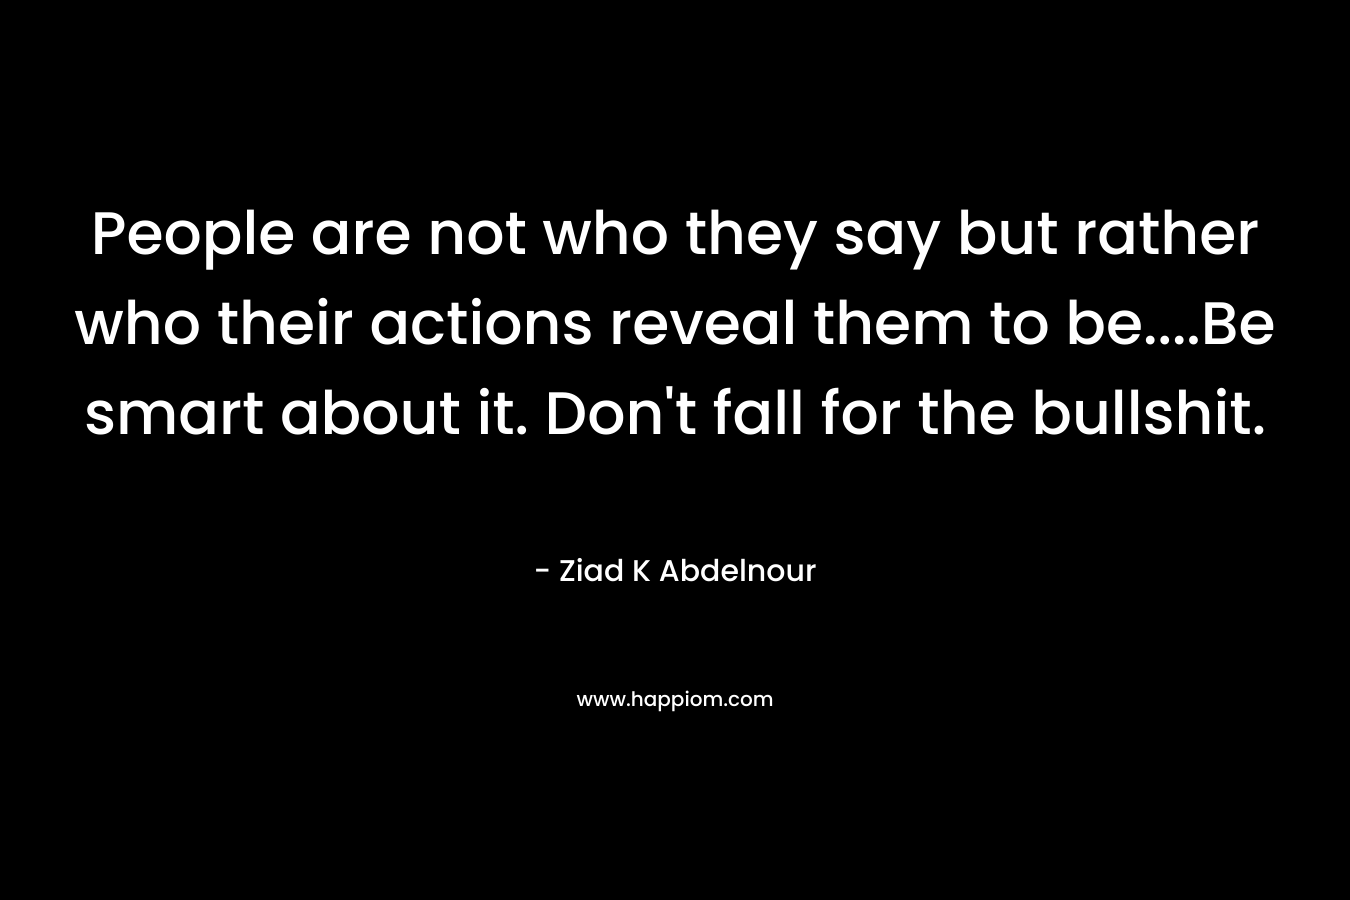 People are not who they say but rather who their actions reveal them to be….Be smart about it. Don’t fall for the bullshit. – Ziad K Abdelnour